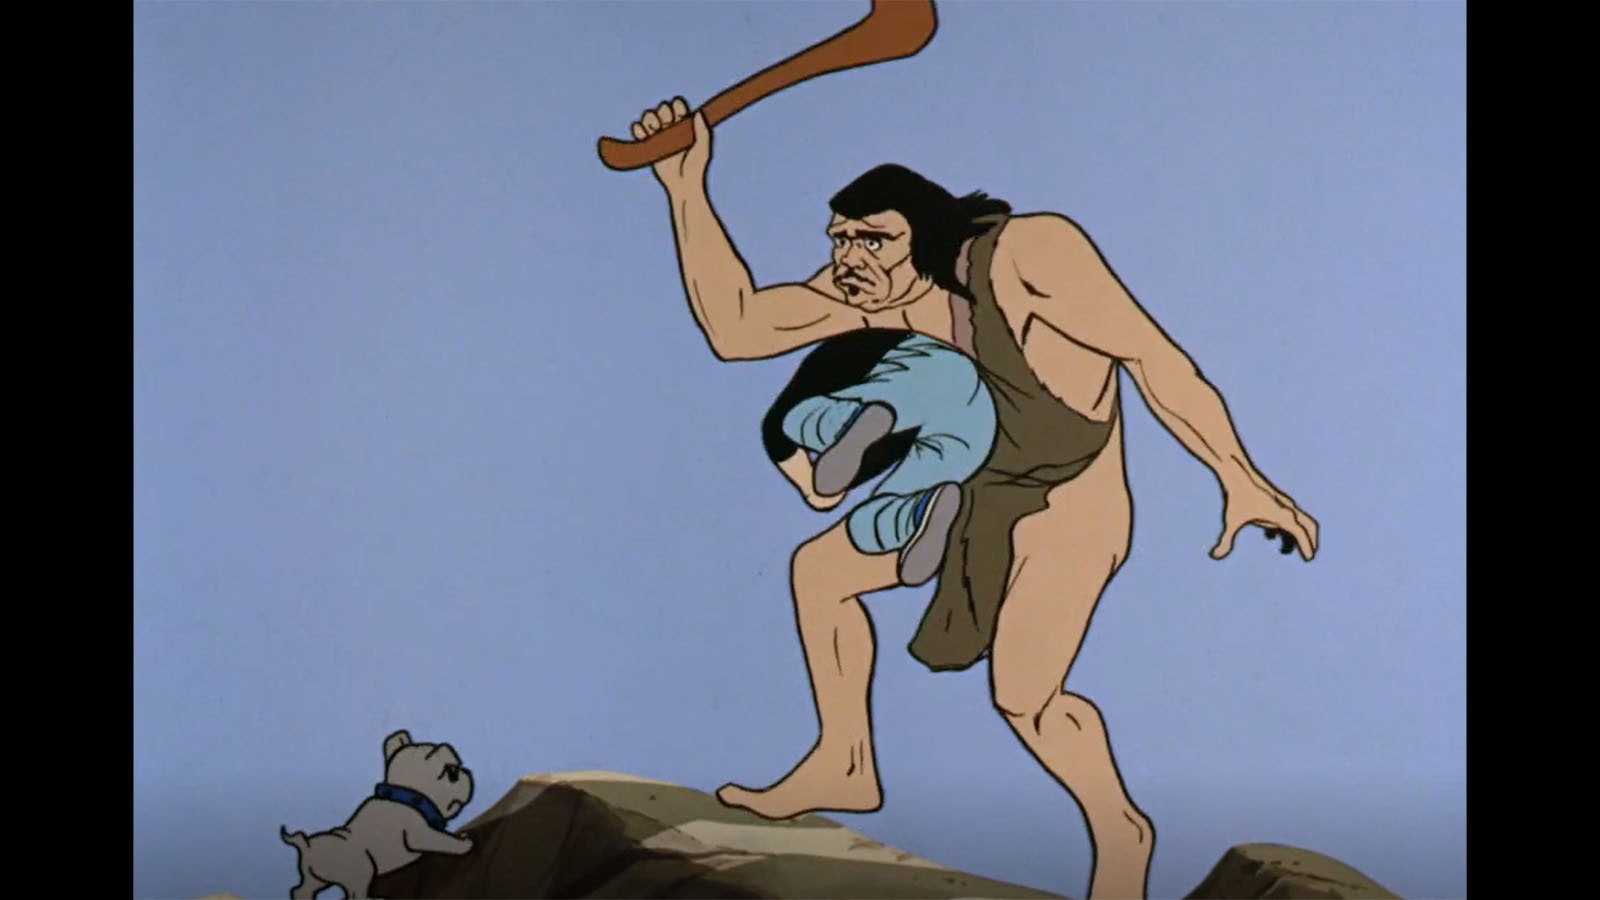 From Episode 21 of "Jonny Quest," "The Devil's Tower."